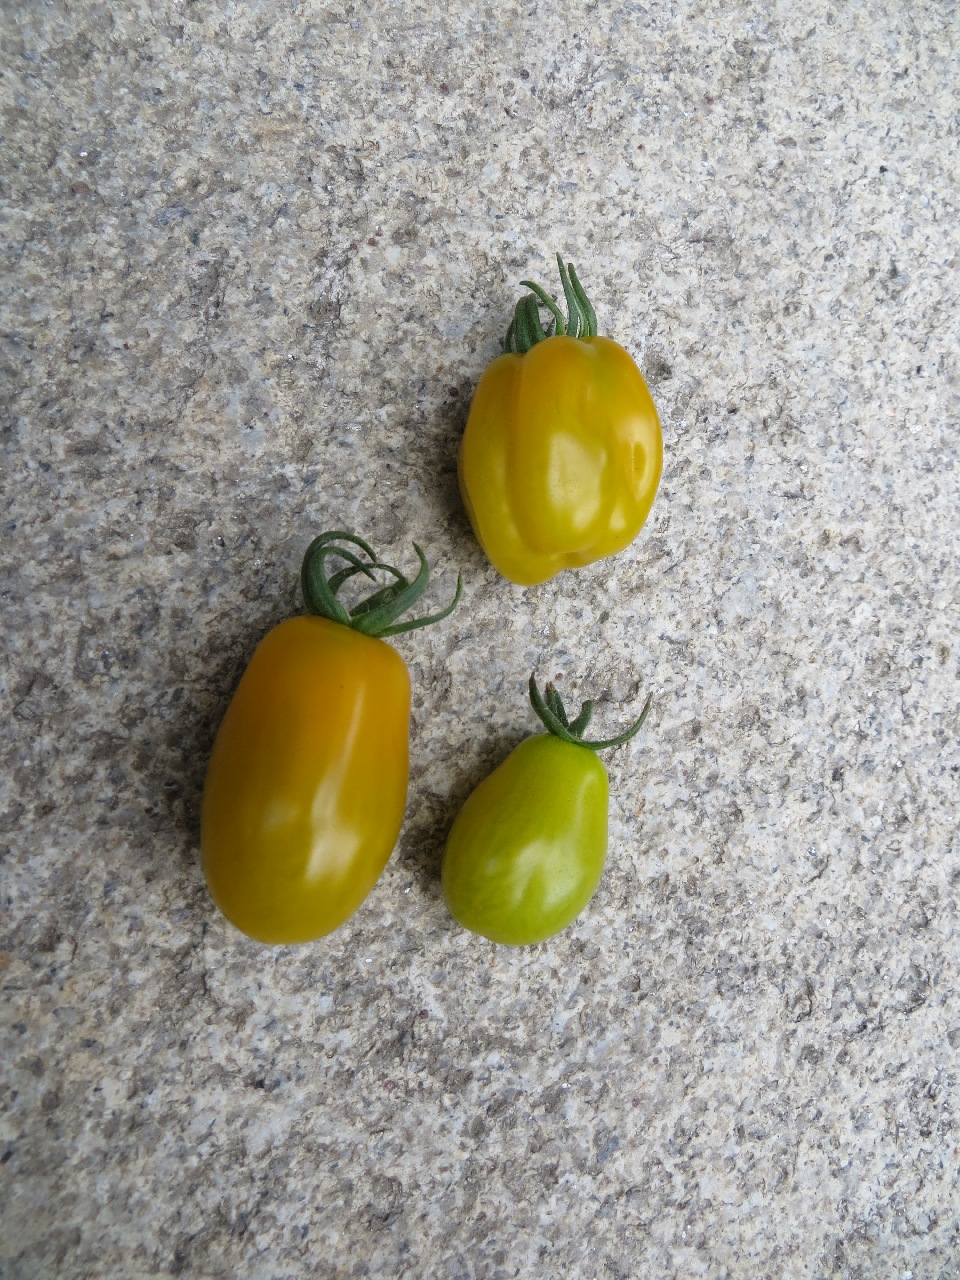 An agressively ridged yellow grape tomato on a granite slab. Below it are two more, the one to the left is larger and fairly blocky/rectangular, while the one to the right is smaller and almost pear-shaped.